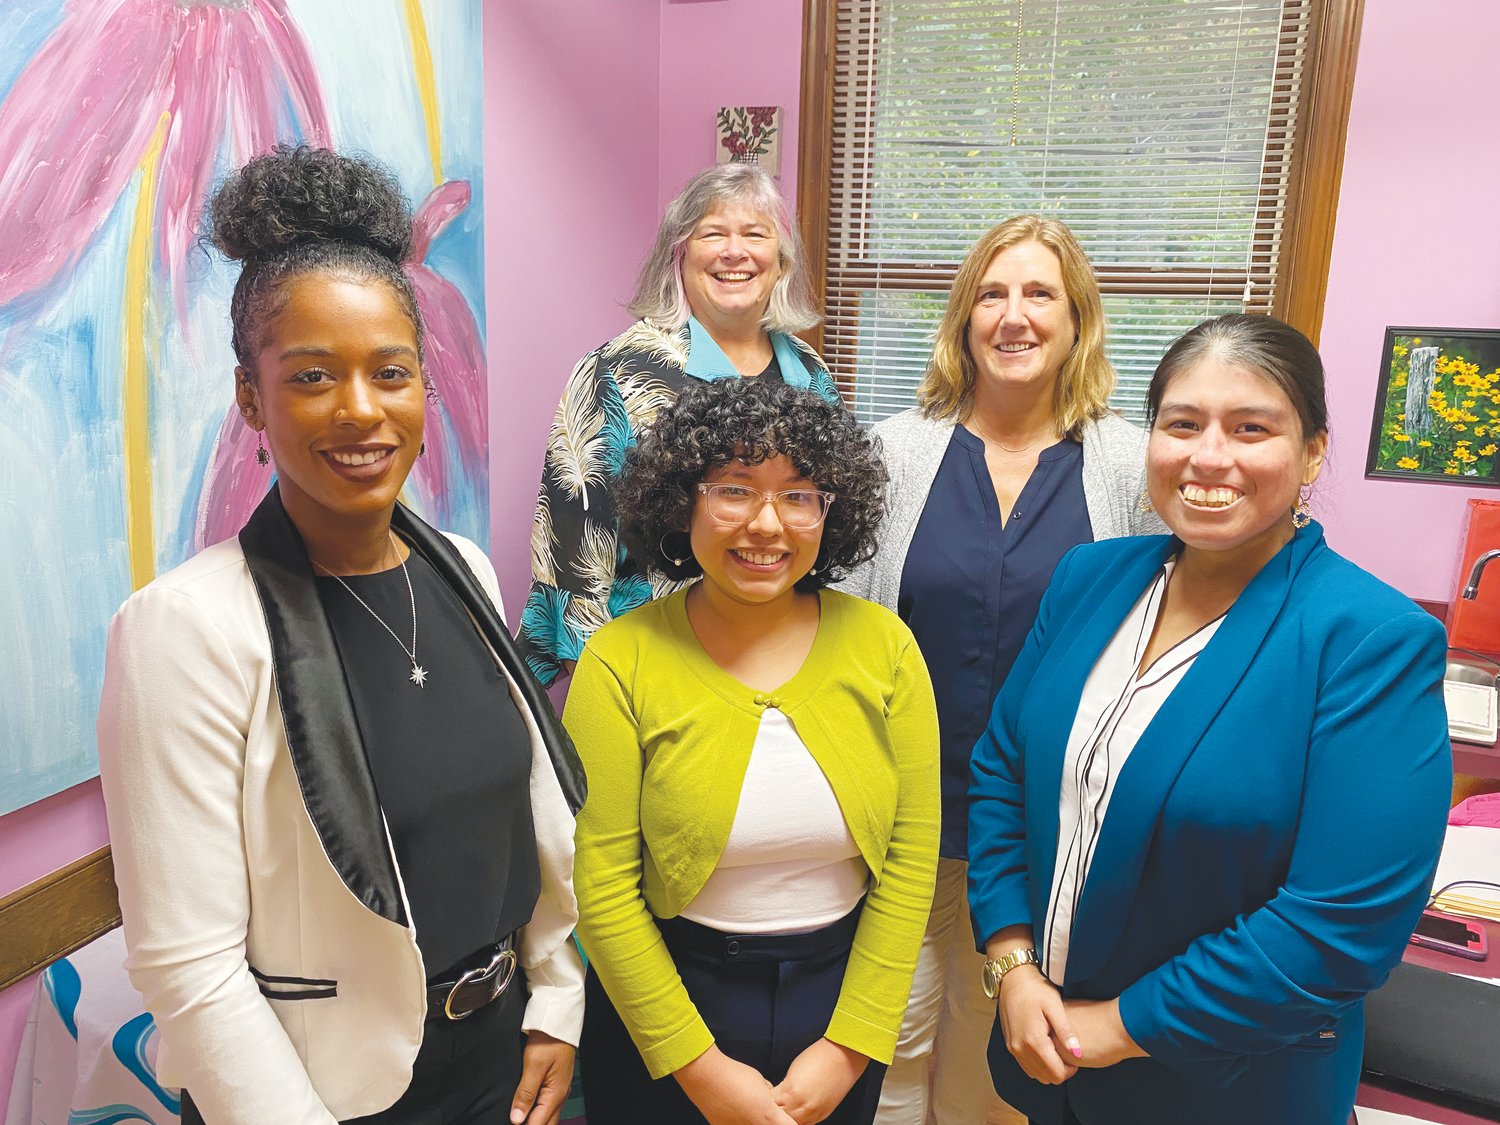 Chatham Literacy's Executive Director, Vicki Newell (in back), poses with staff members, from left, Kayla McCline, Joselyn Villasenor, D.J. Lynch and Leslie Ocampo.